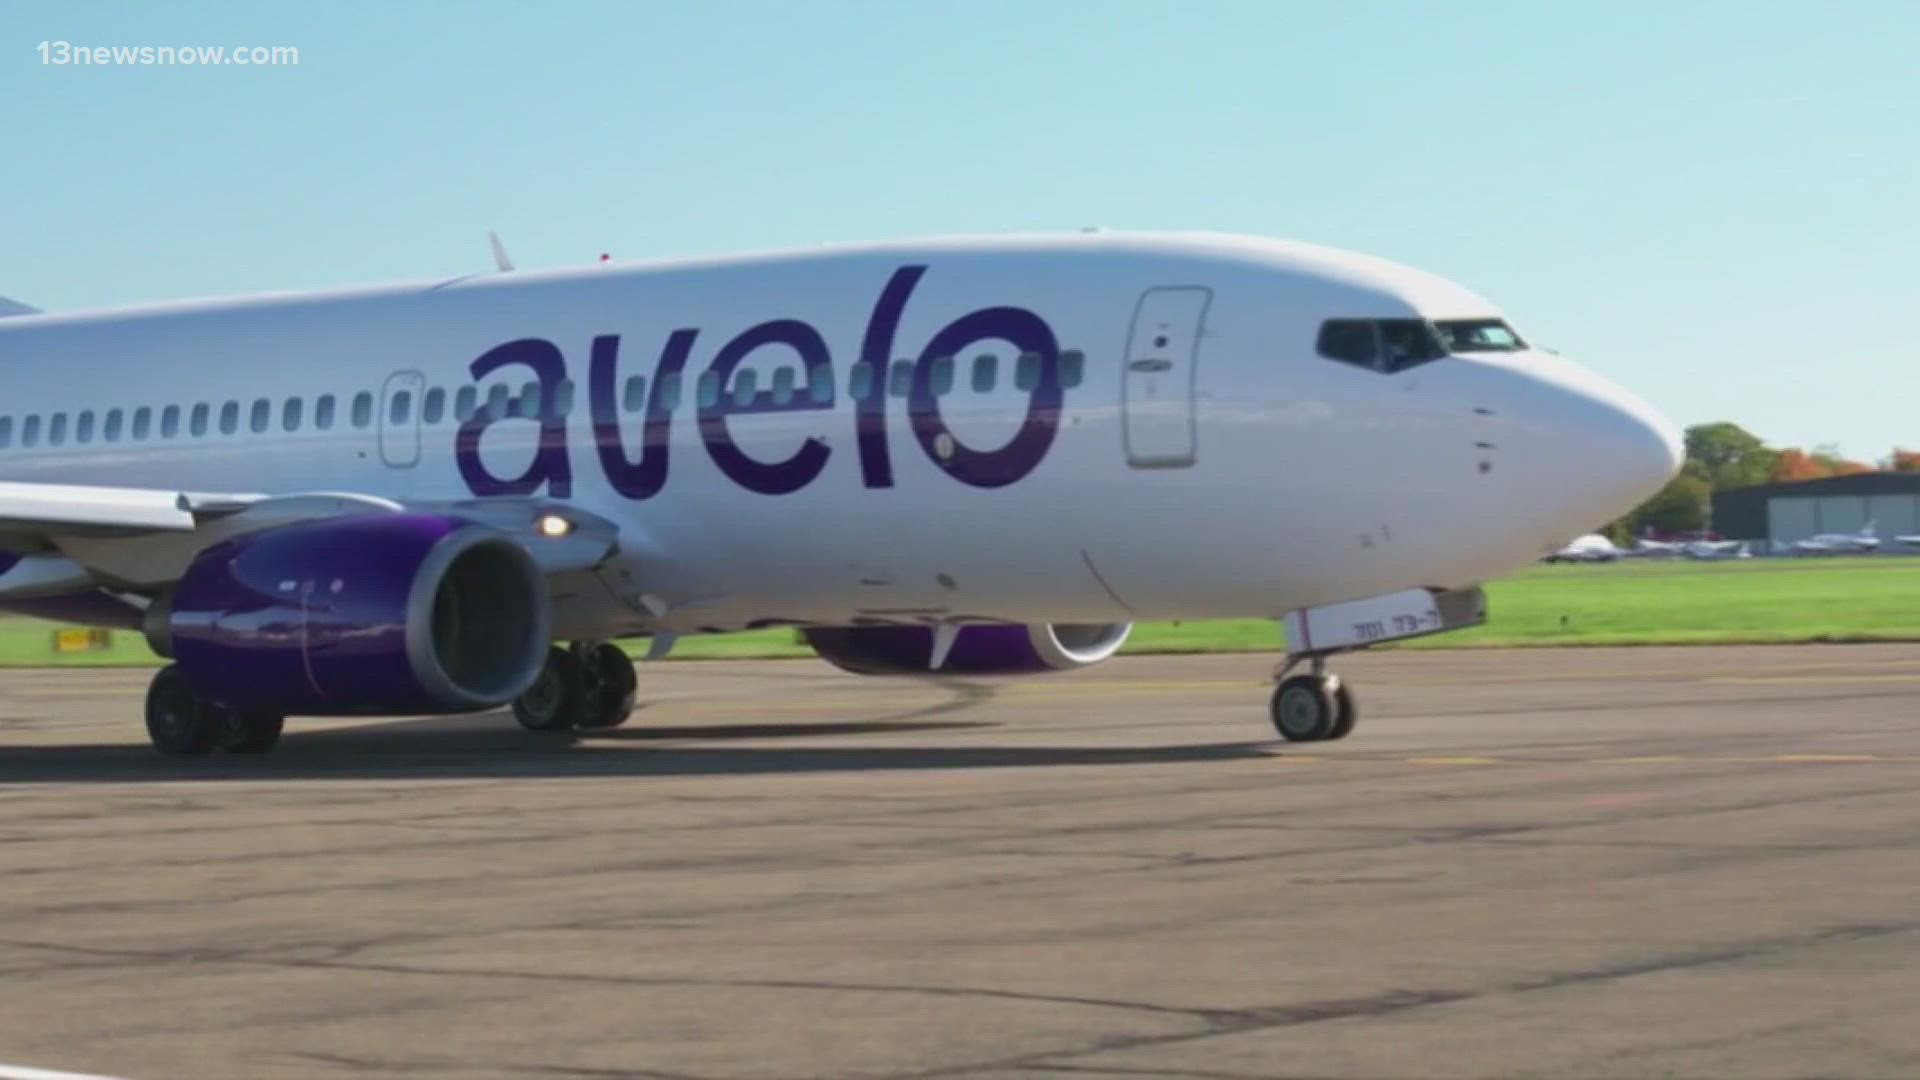 Avelo Airlines will offer two non-stop flights to Florida from the Newport News-Williamsburg International Airport.